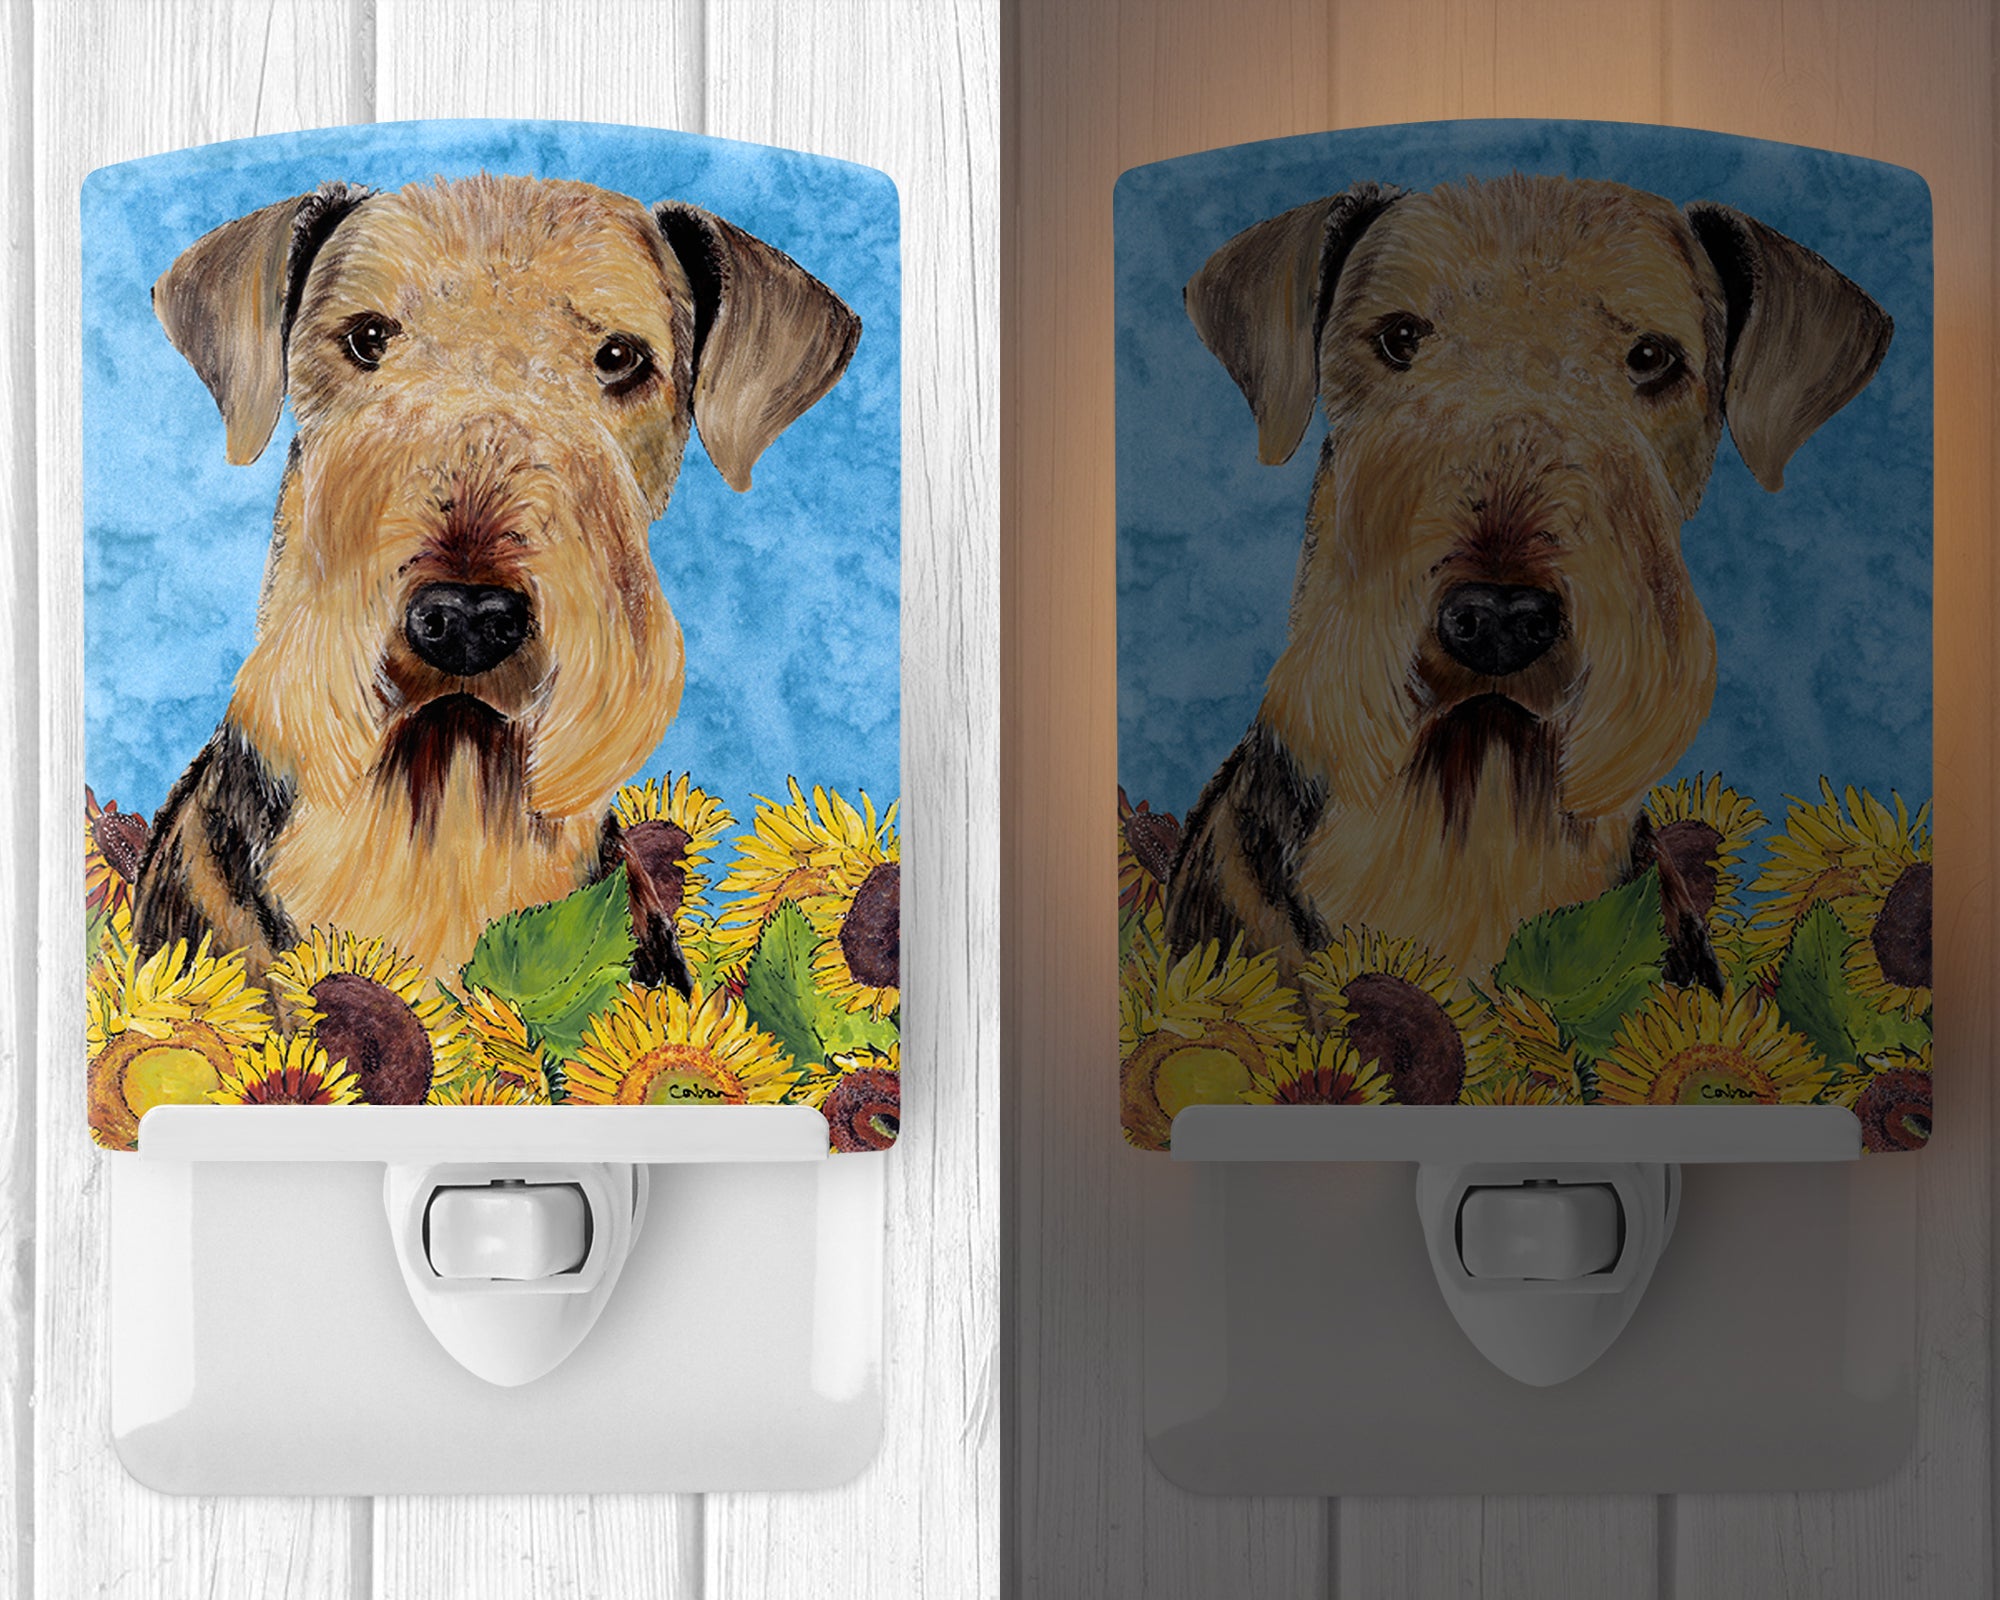 Airedale in Summer Flowers Ceramic Night Light SC9069CNL - the-store.com